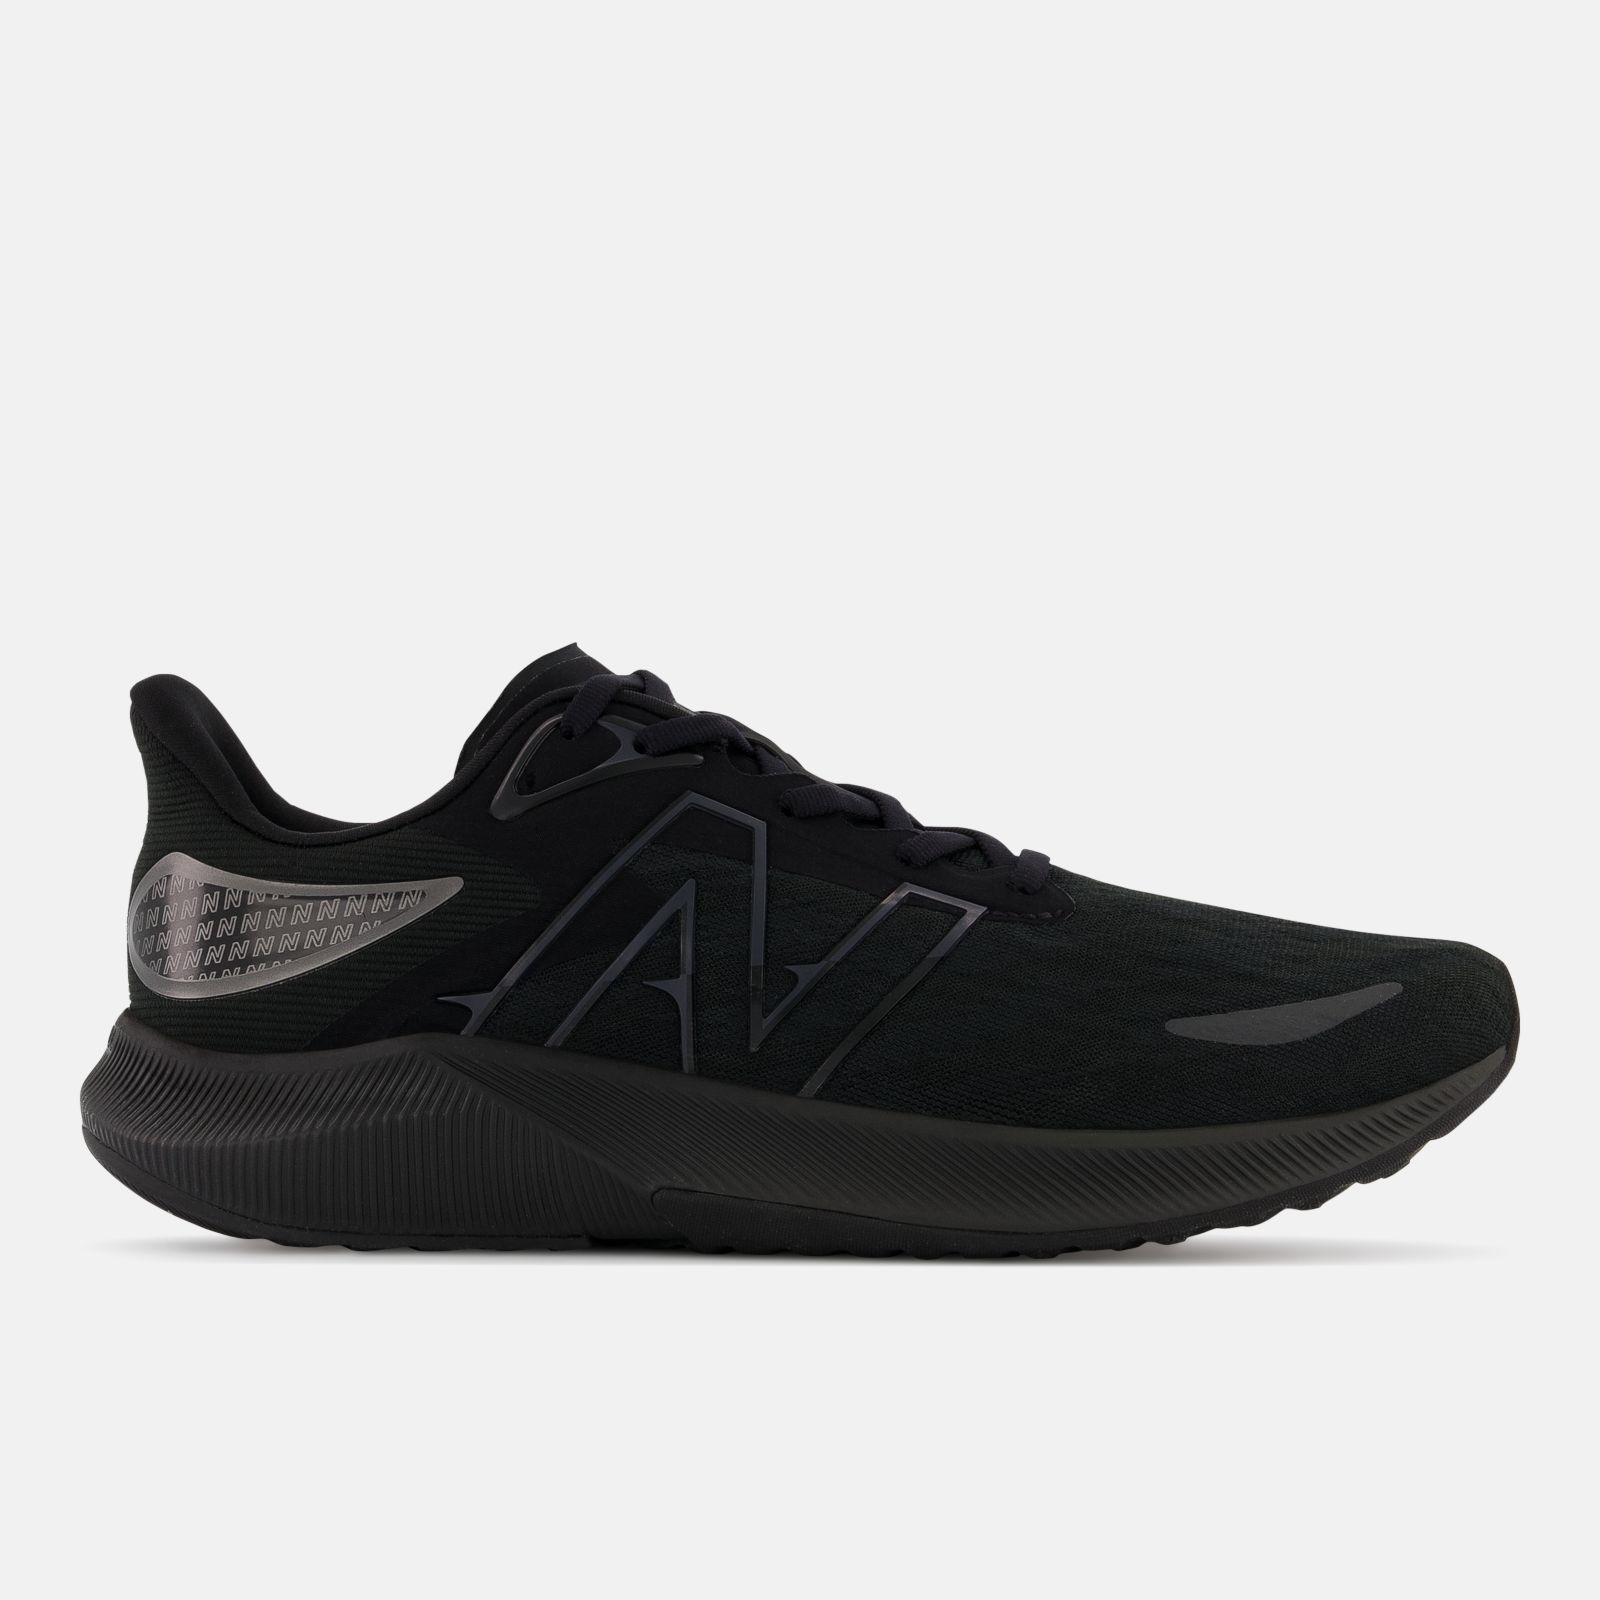 New Balance FuelCell Propel v3, Black, swatch